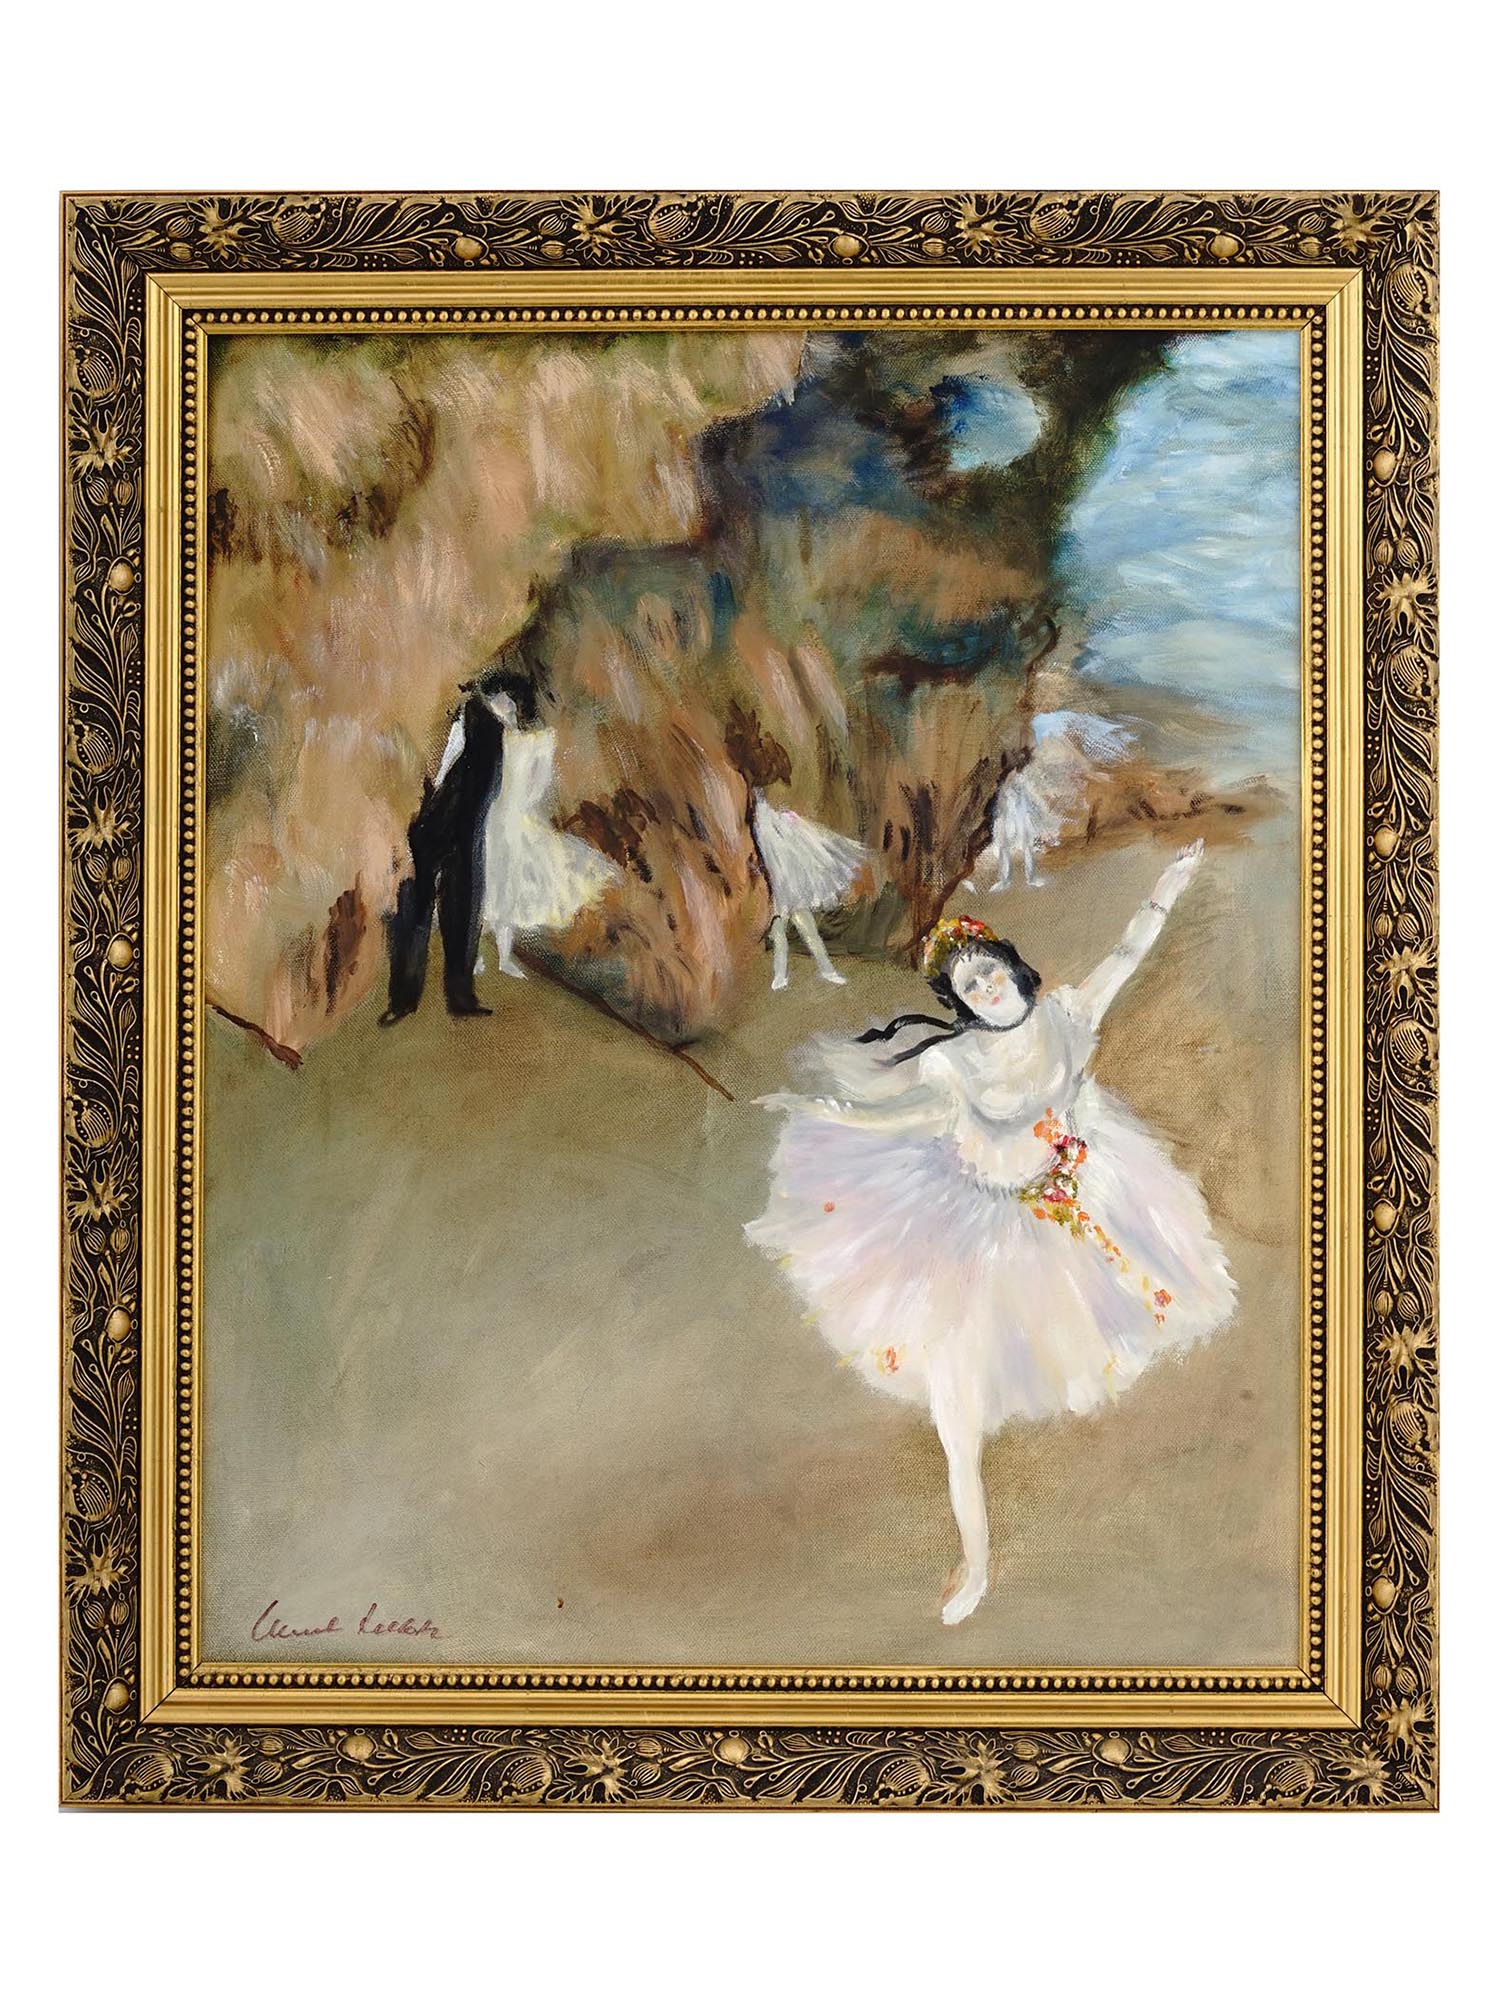 IMPRESIONIST PAINTING BALLERINA AFTER EDGAR DEGAS PIC-0